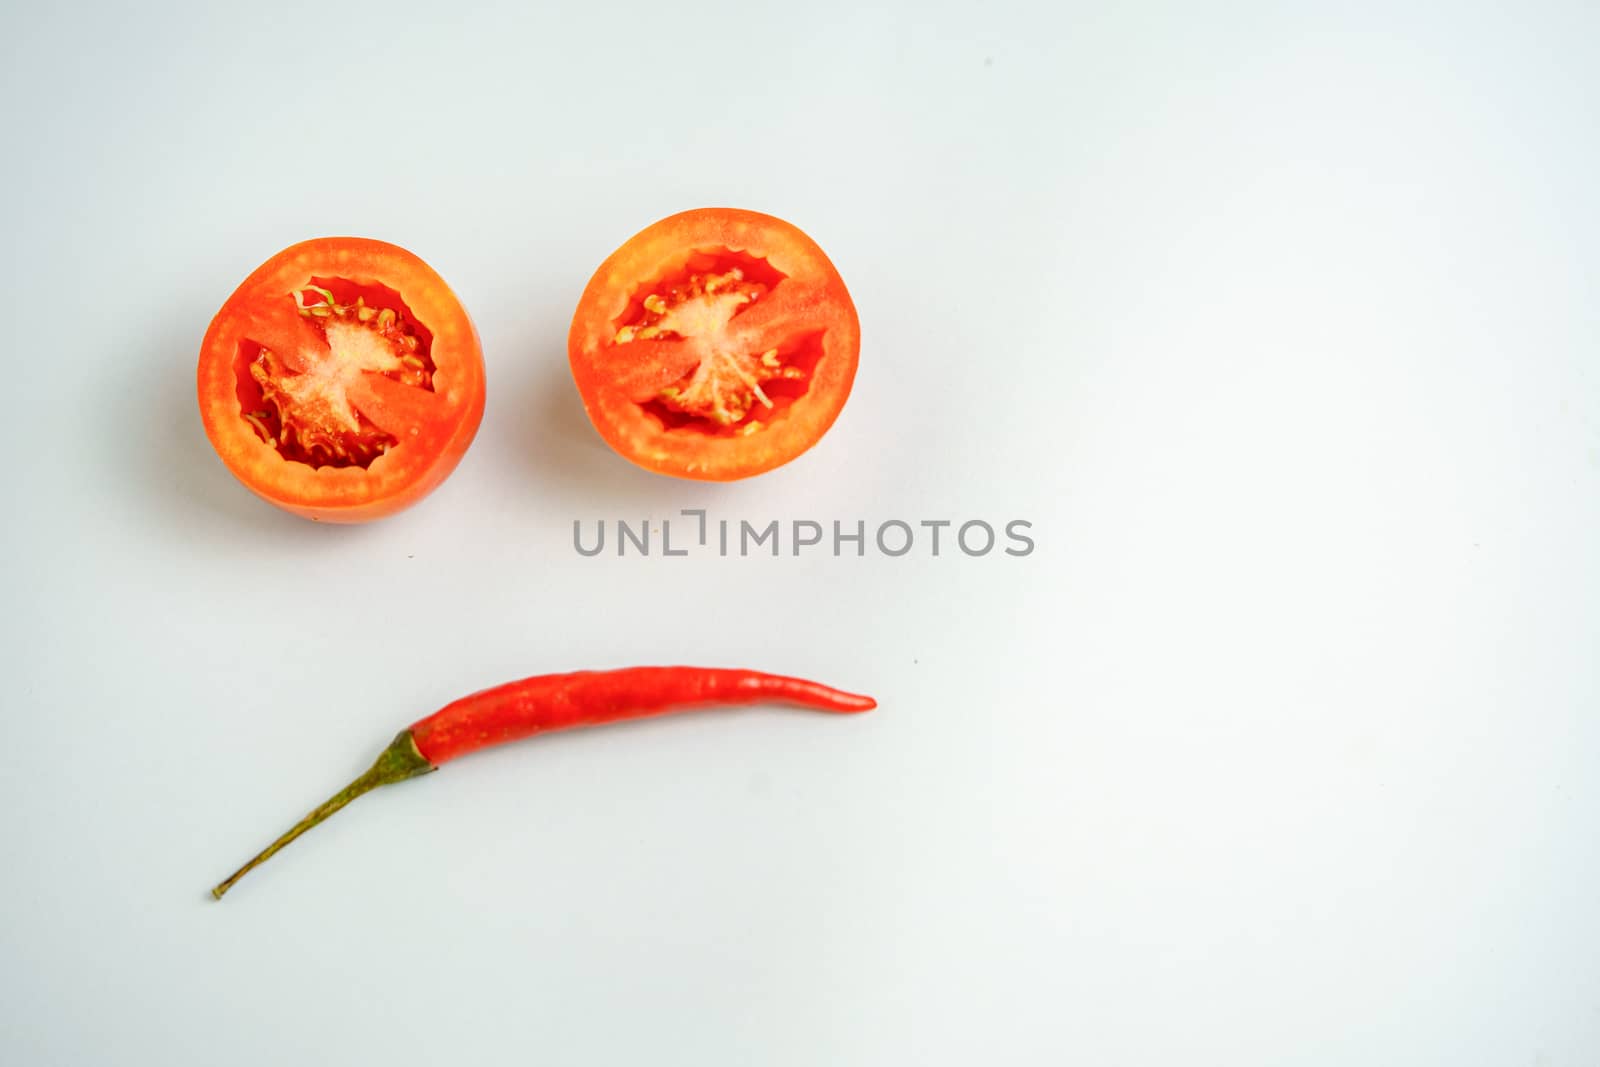 Red tomatoes and red peppers are sad in the white background